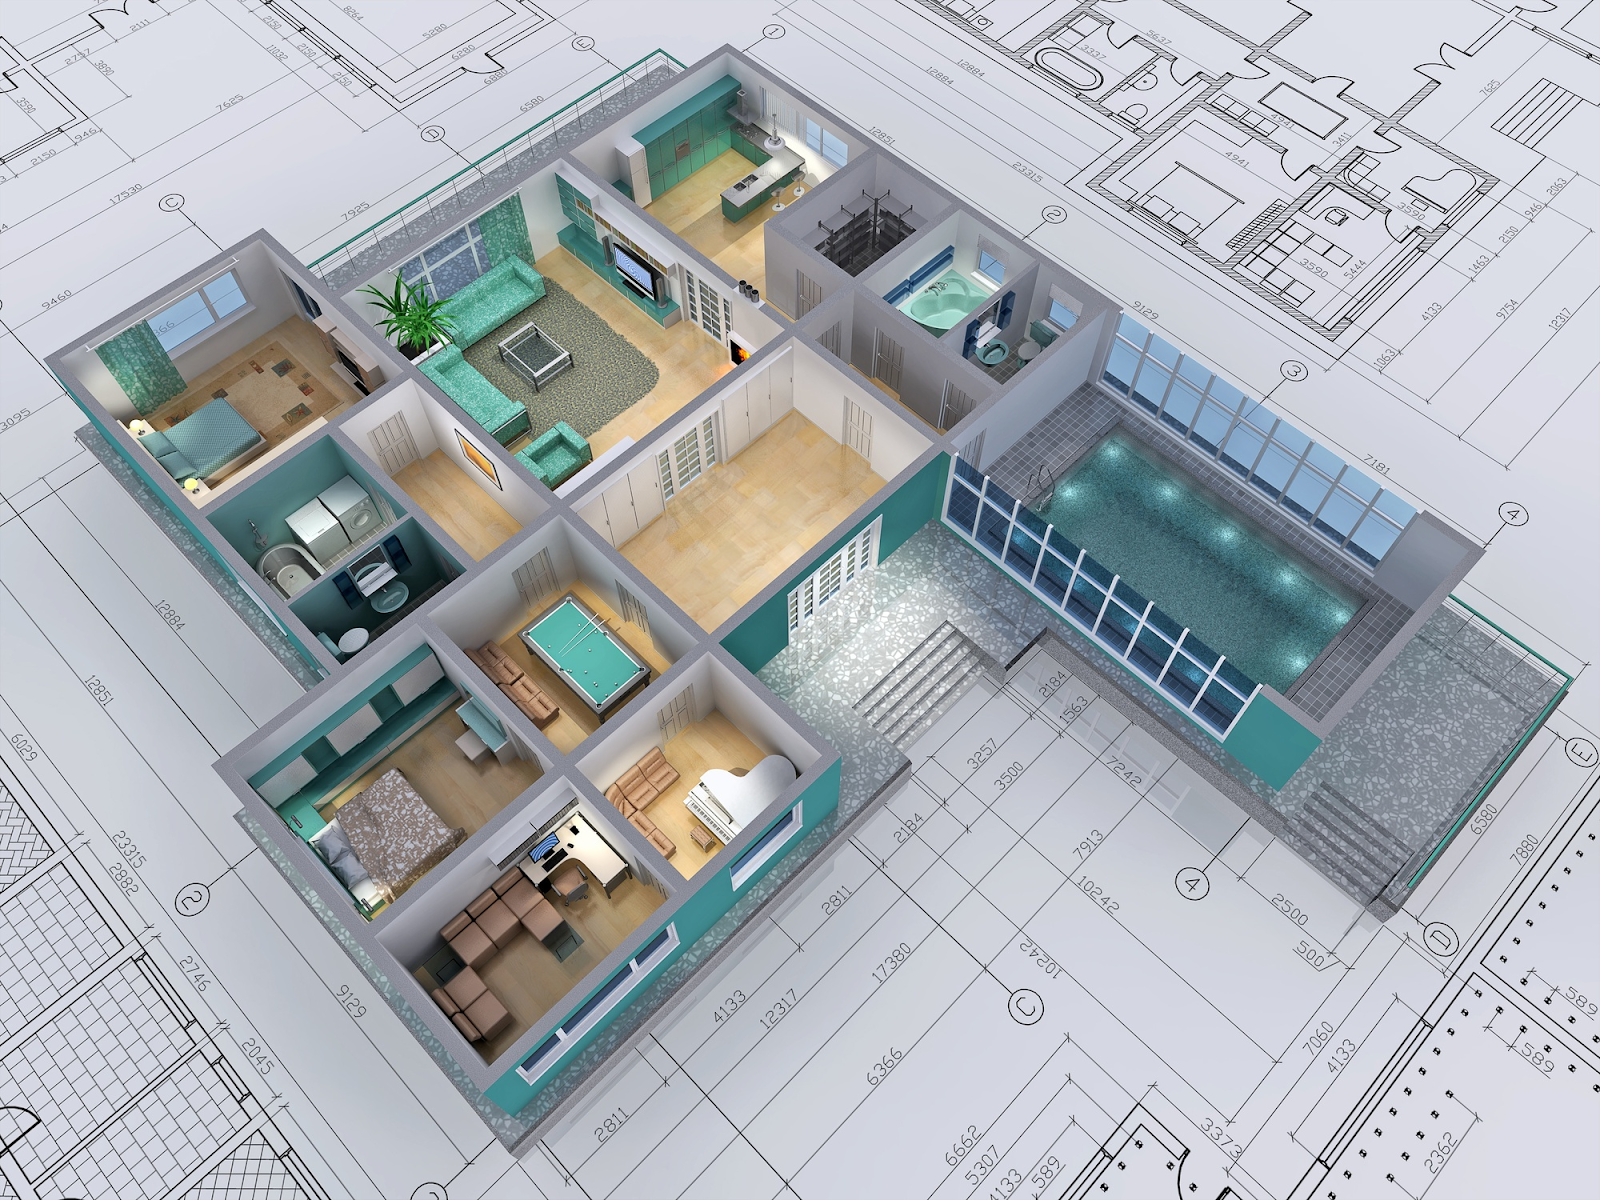 Top view of 3D visualization of a house